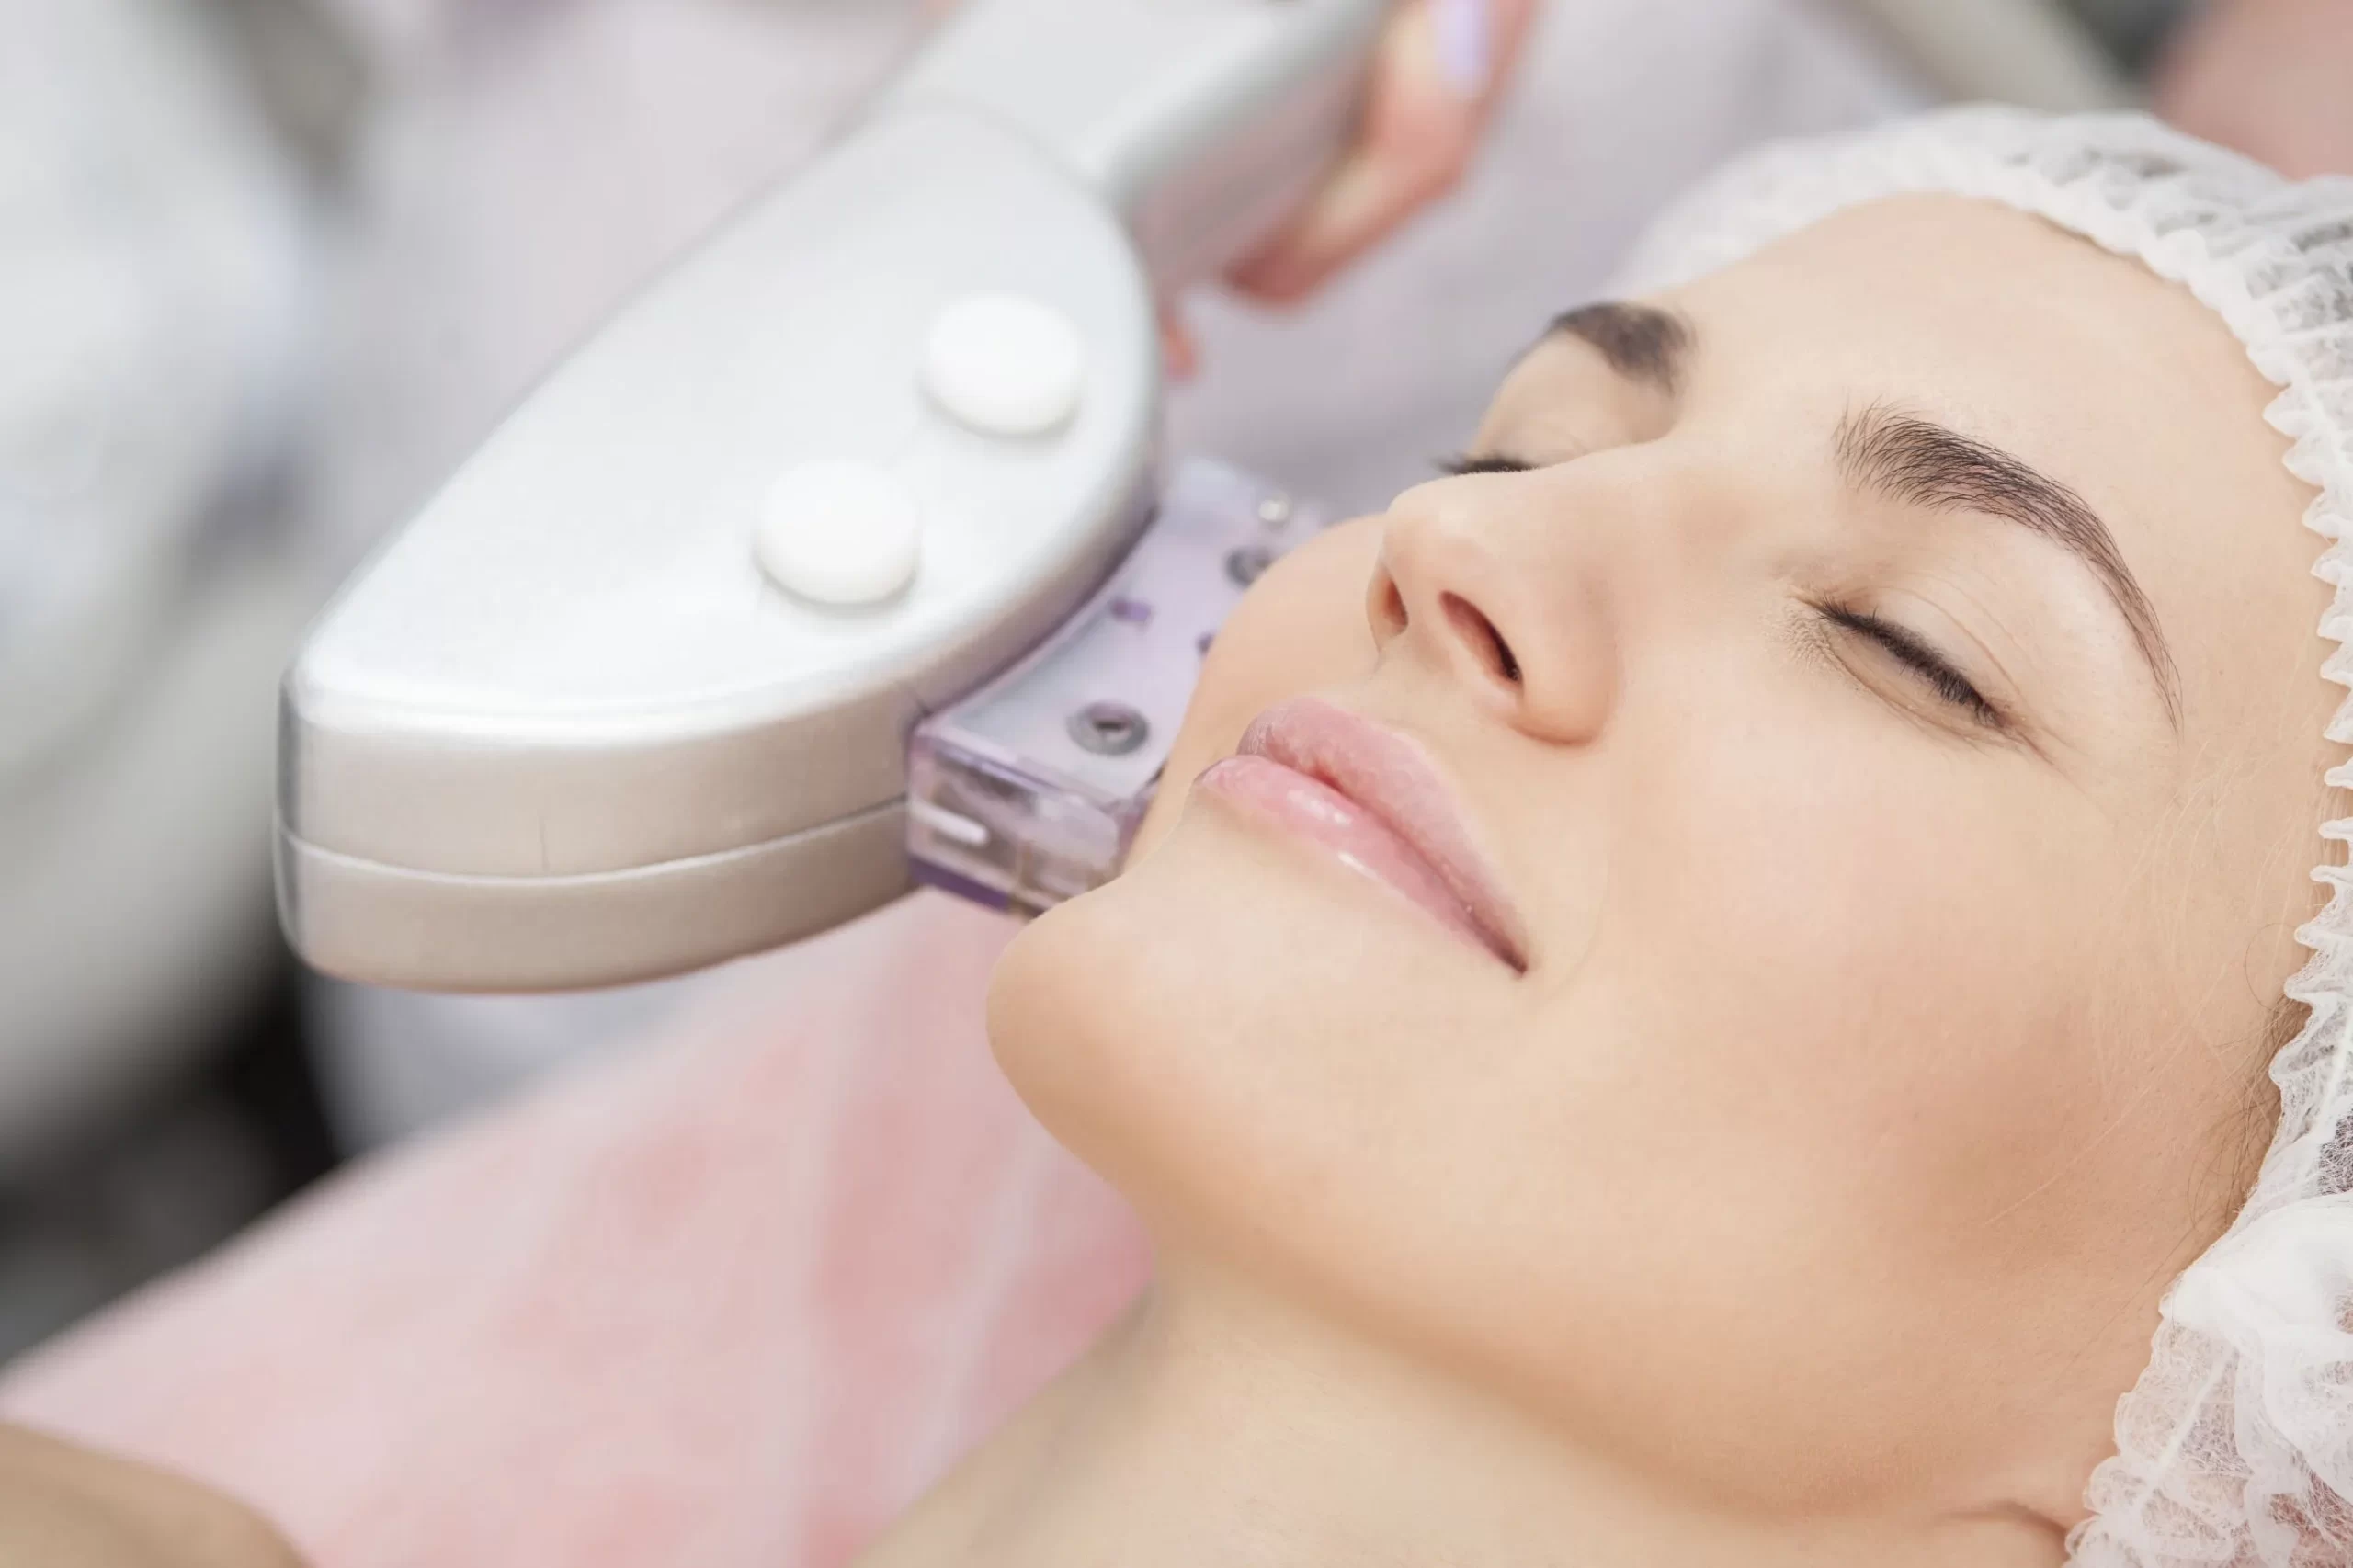 The versatility of a Med Spa practitioner: From lasers to facials